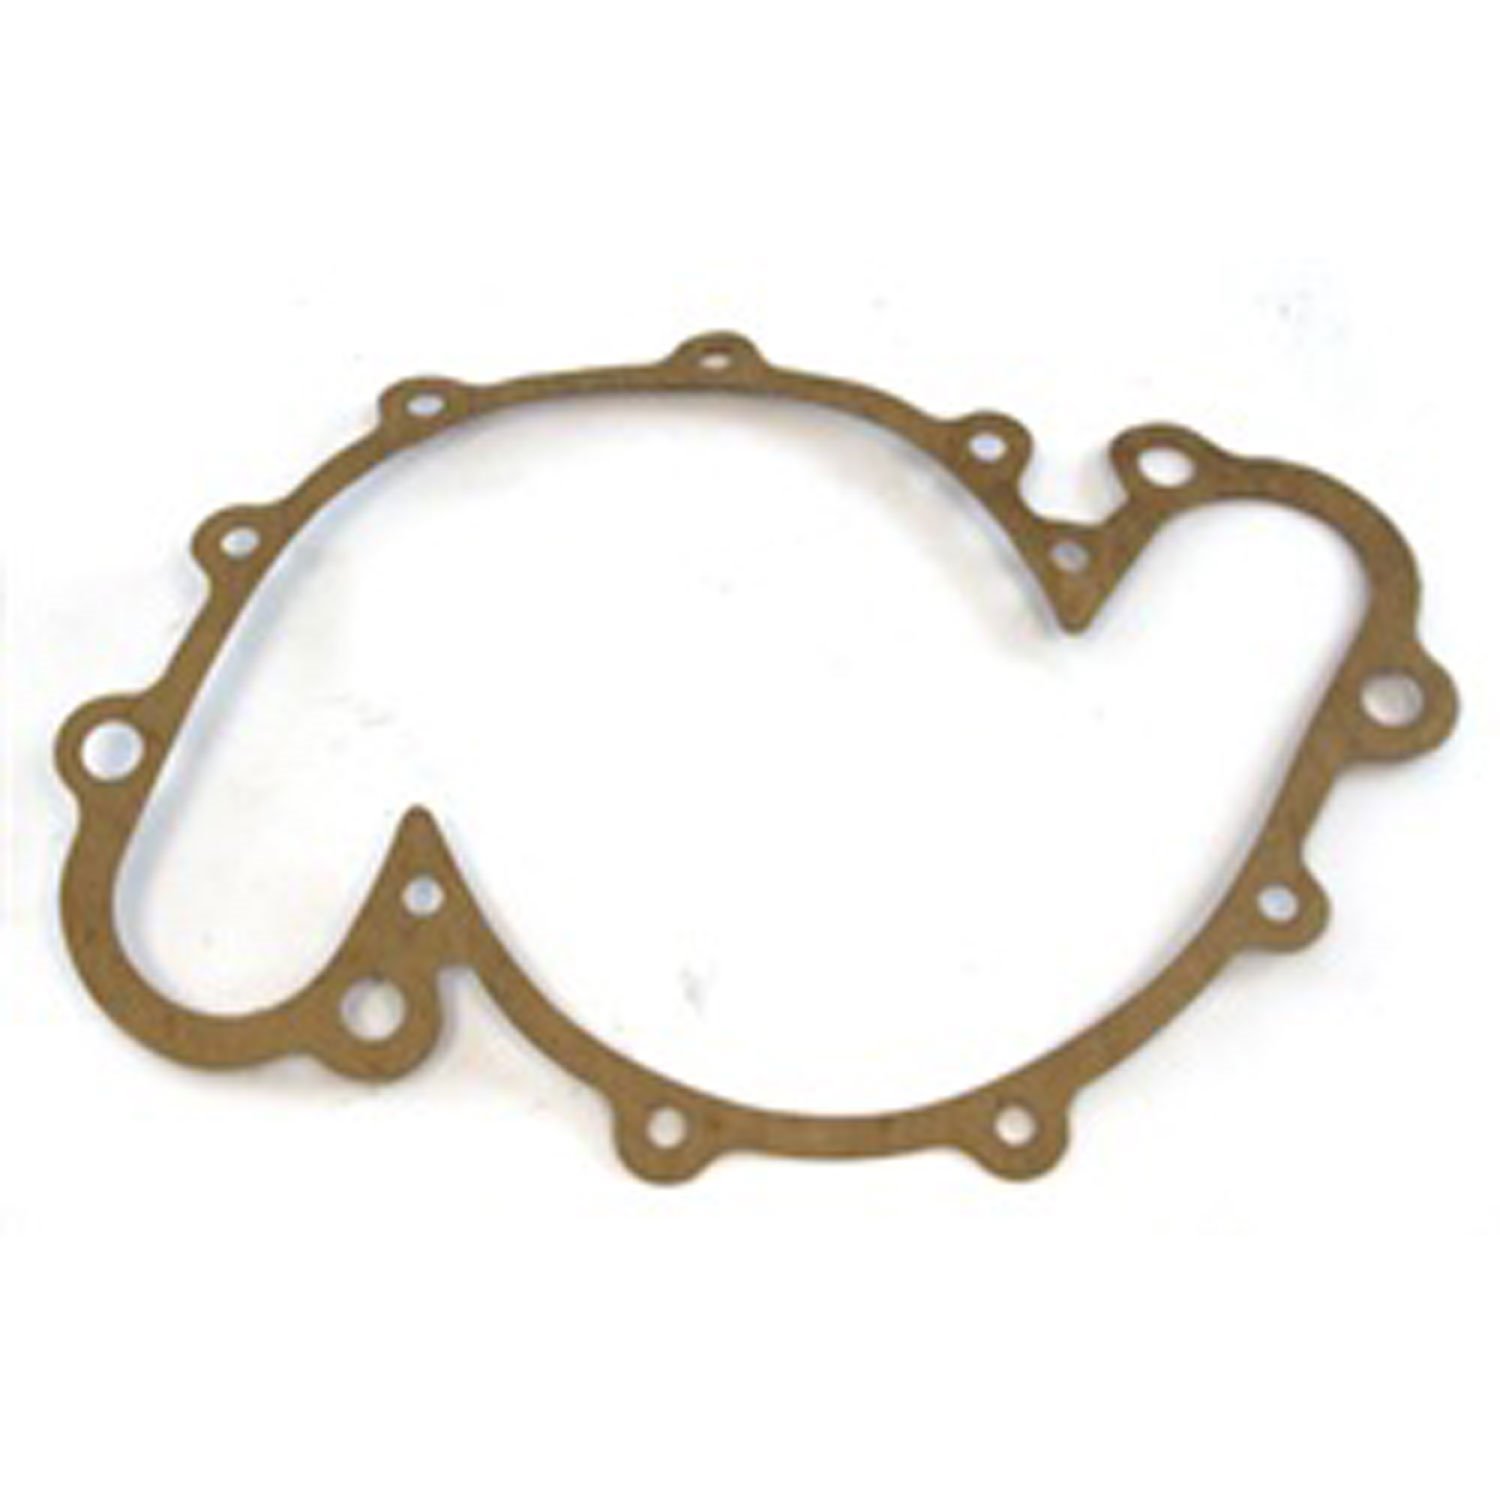 This water pump gasket from Omix-ADA fits 72-81 Jeep CJ5 76-81 CJ7 and 1981 CJ8 with a 304 cubic inch V8 engine.